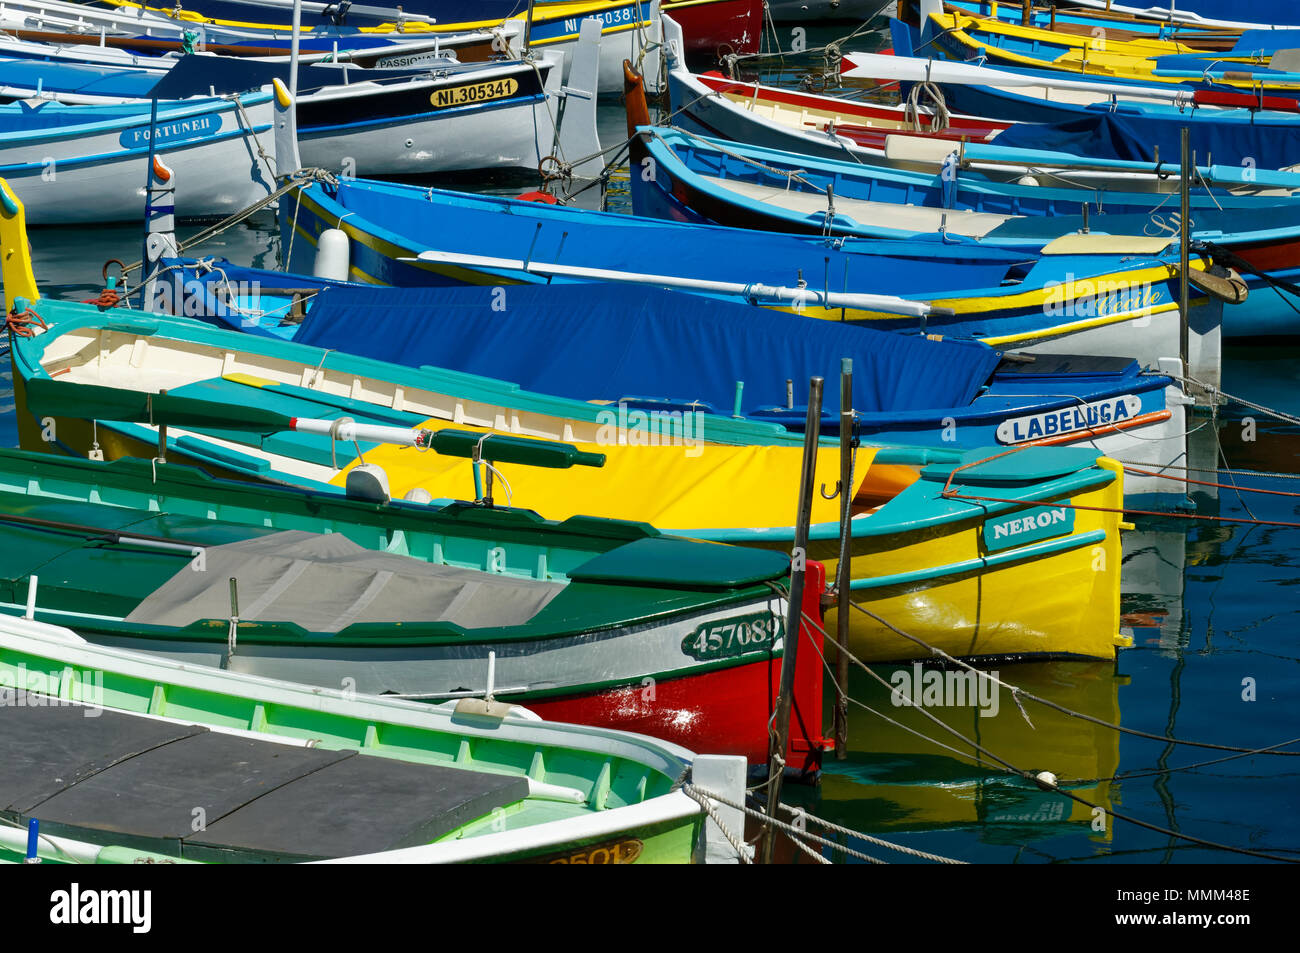 Small colorful wooden fishing boats named Pointus moored in old